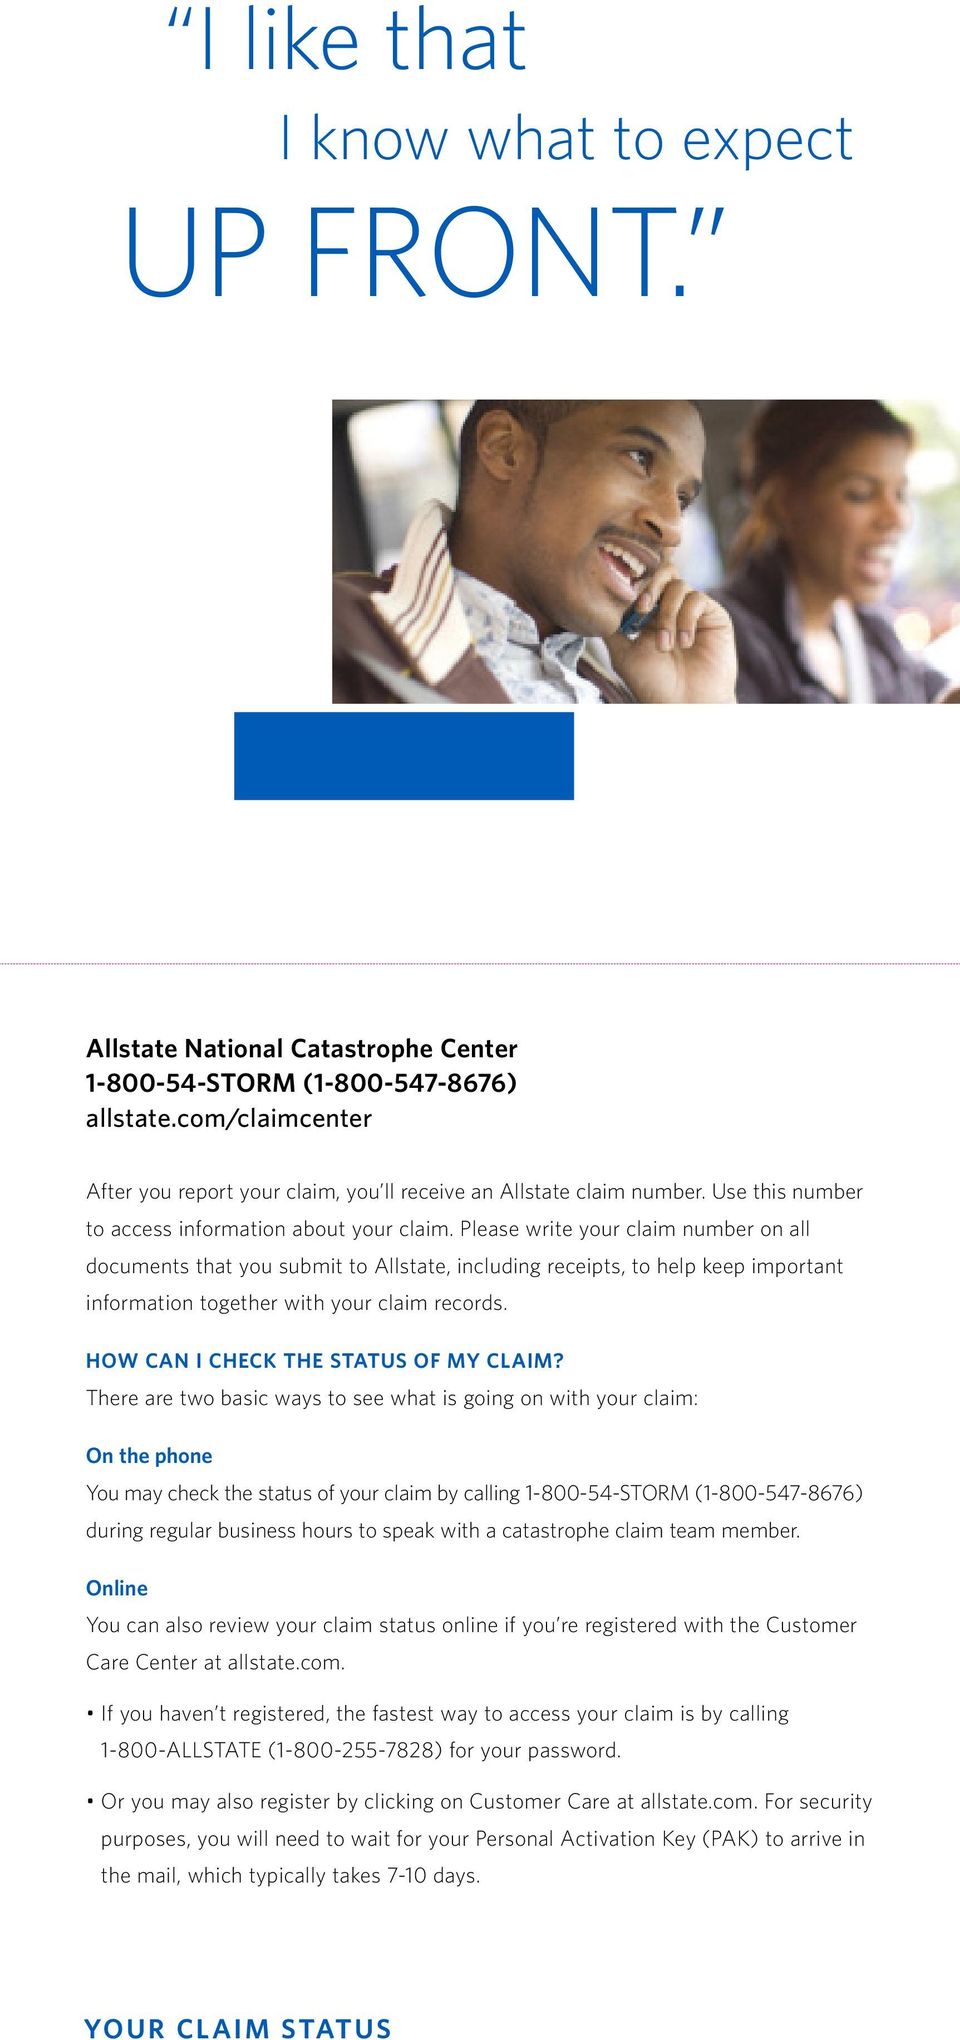 Please write your claim number on all documents that you submit to Allstate, including receipts, to help keep important information together with your claim records.